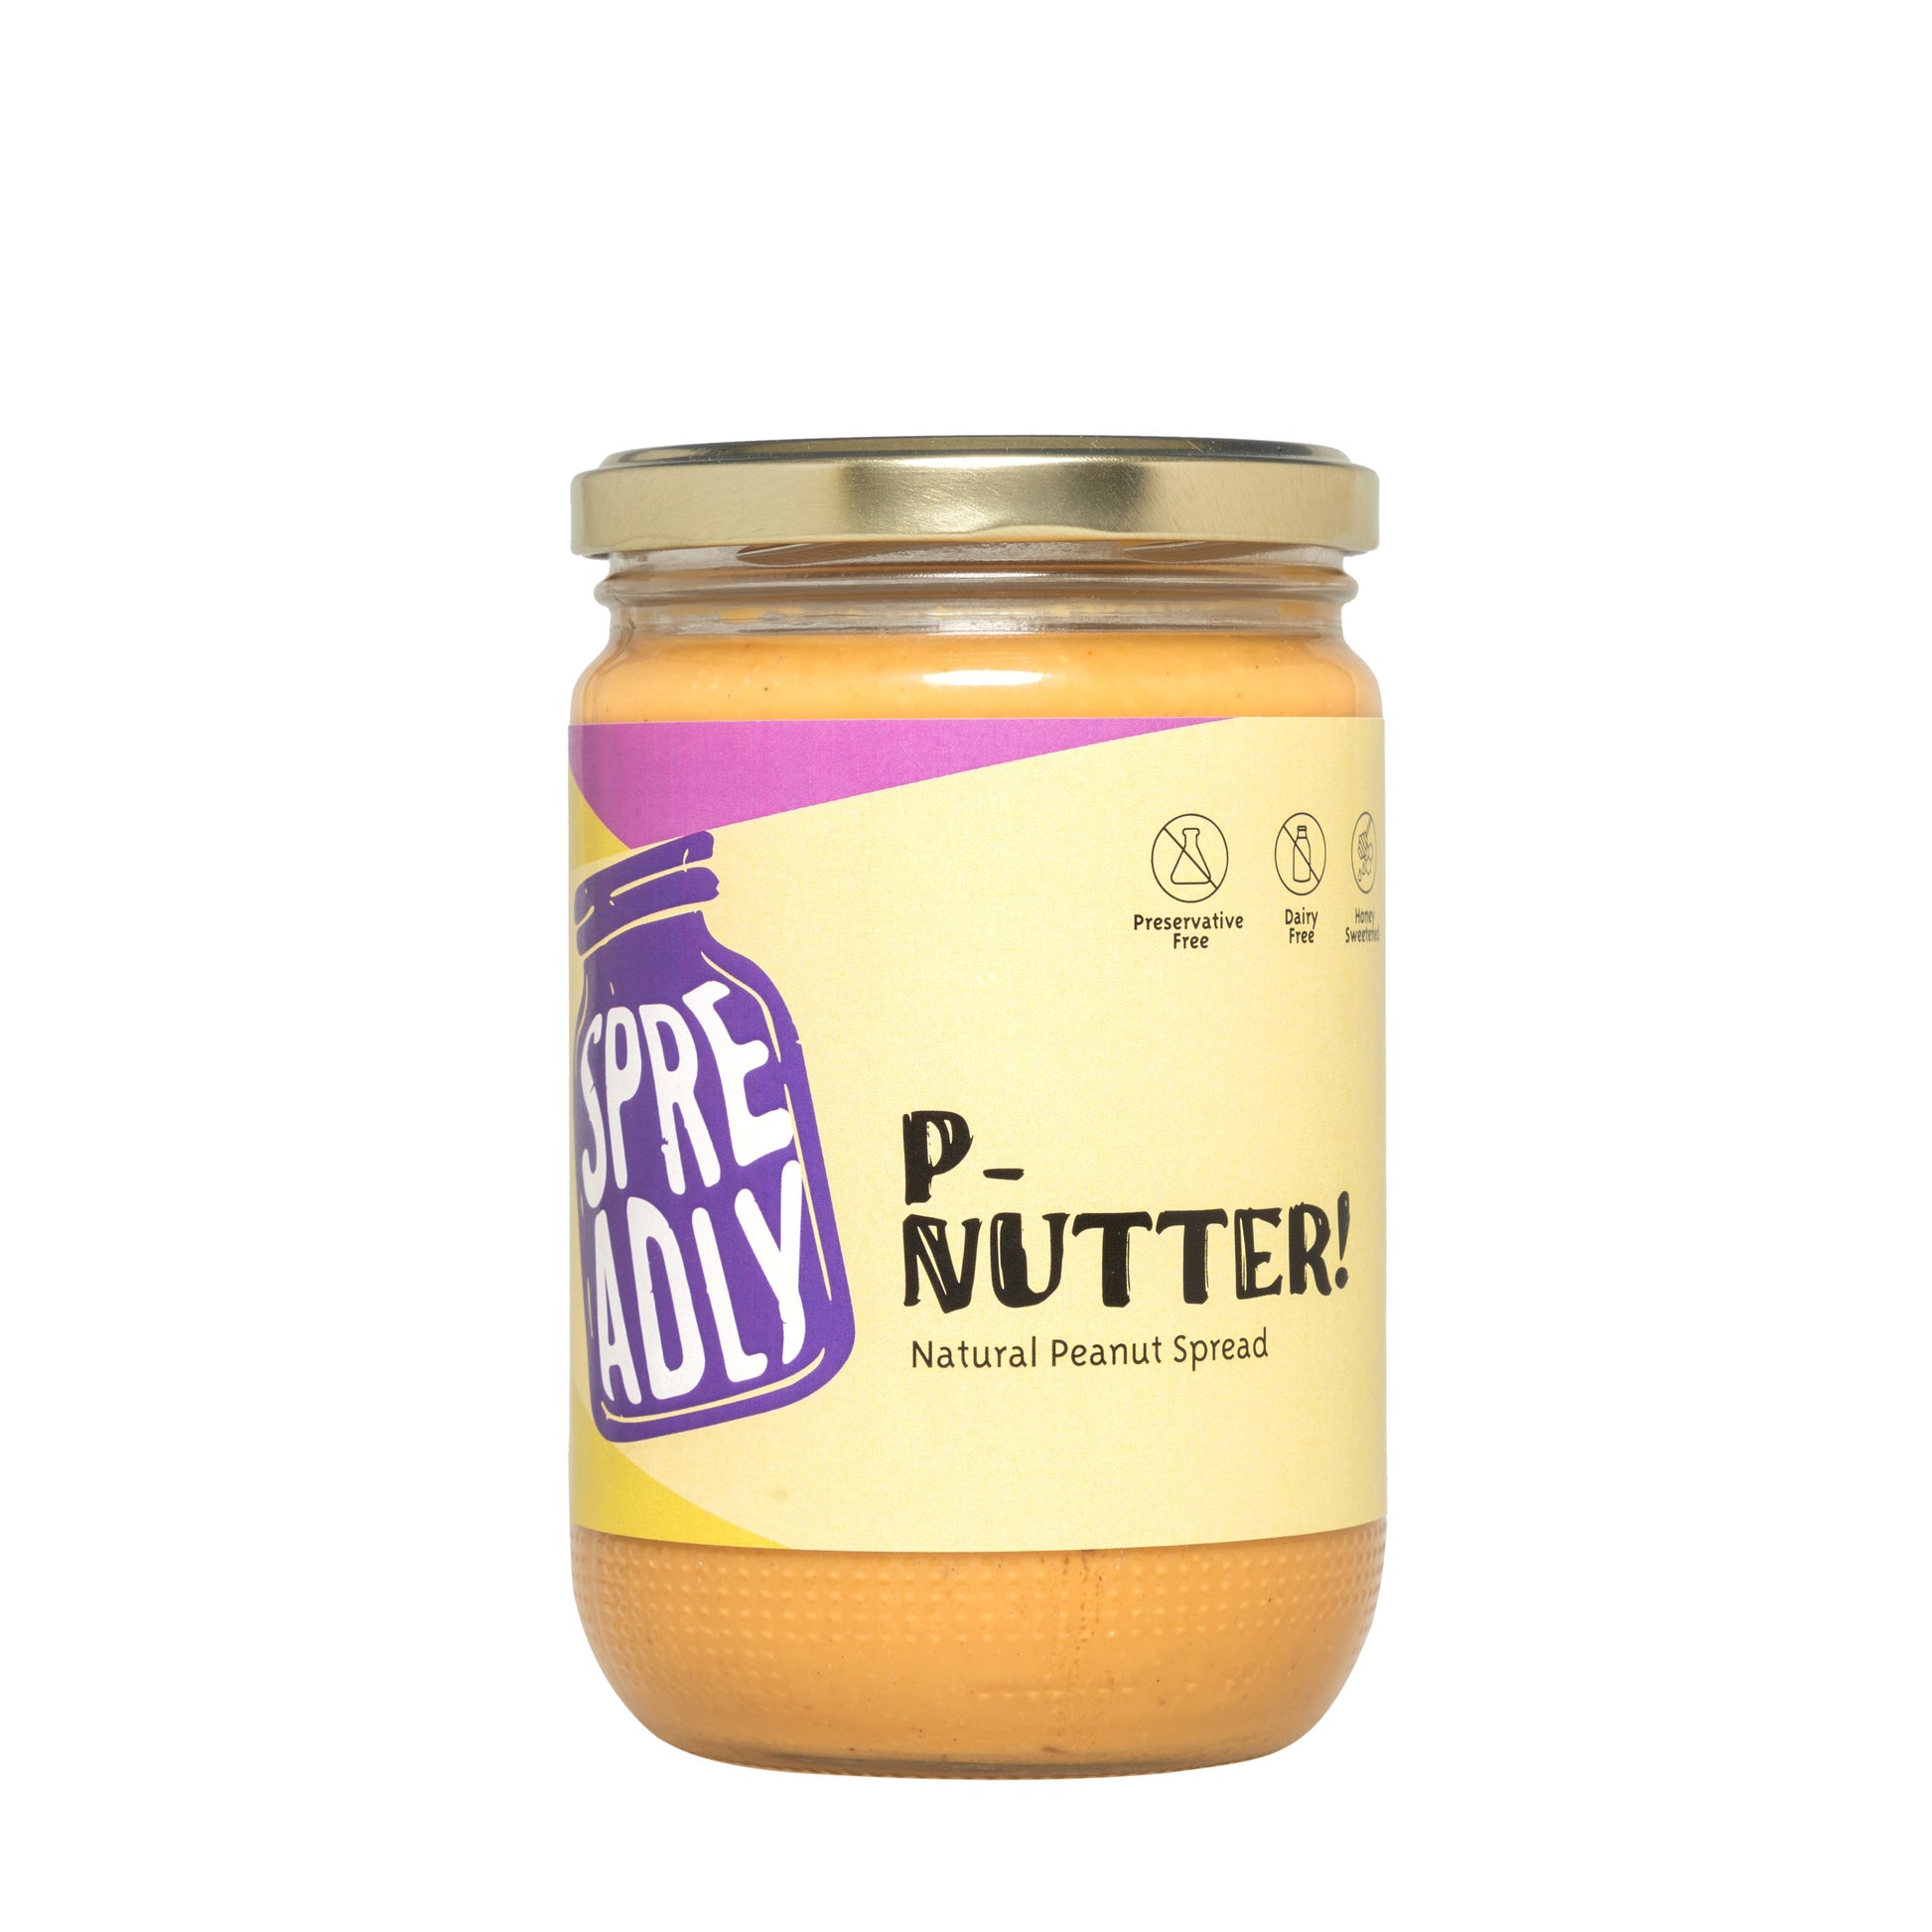 Natural Peanut Spread Made from Natural Ingredients and Sweetened with Honey . No preservatives - No sugar and no palm oil 